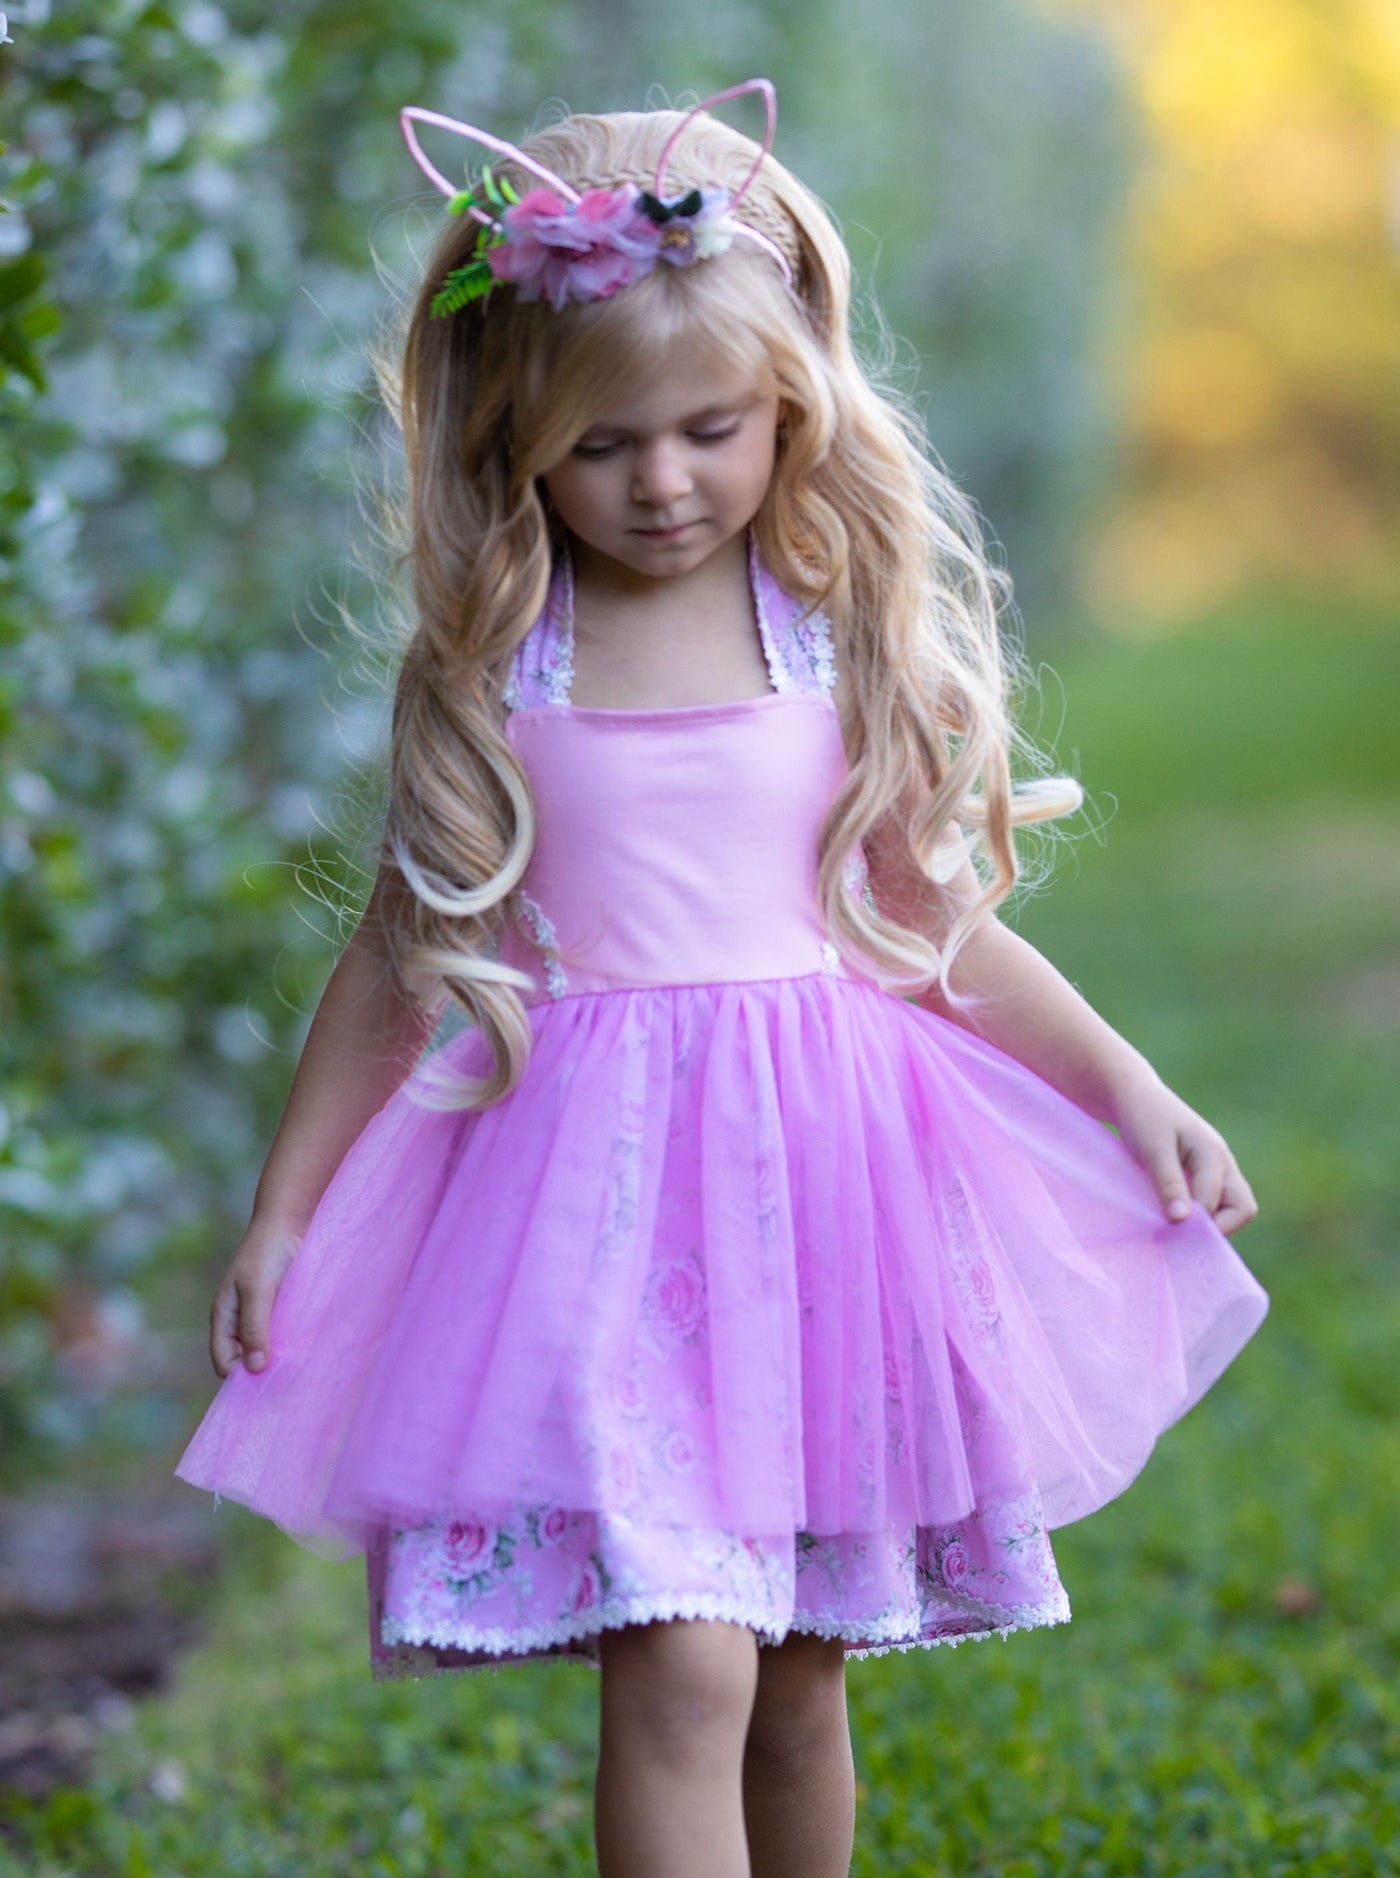 Mia Belle Girls Easter Dresses | Bunny Embroidered Tulle Dress